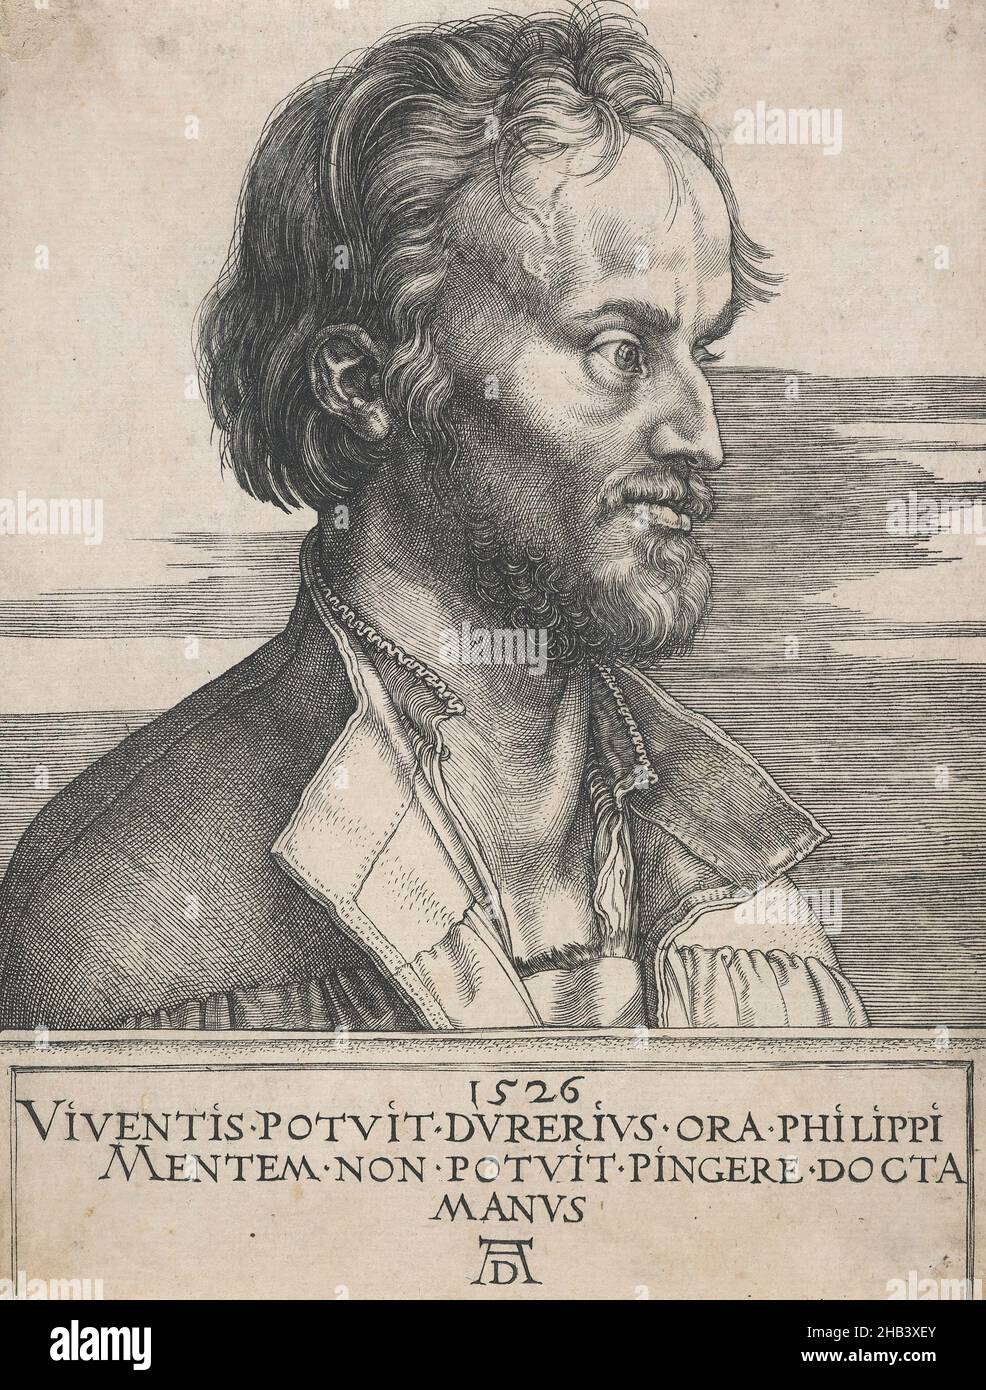 Philipp Melanchthon., Albrecht Dürer, artist, 1526, Germany, engraving, Philip Melanchthon (1497-1560) was a leading figure of the Protestant Reformation in Germany Stock Photo